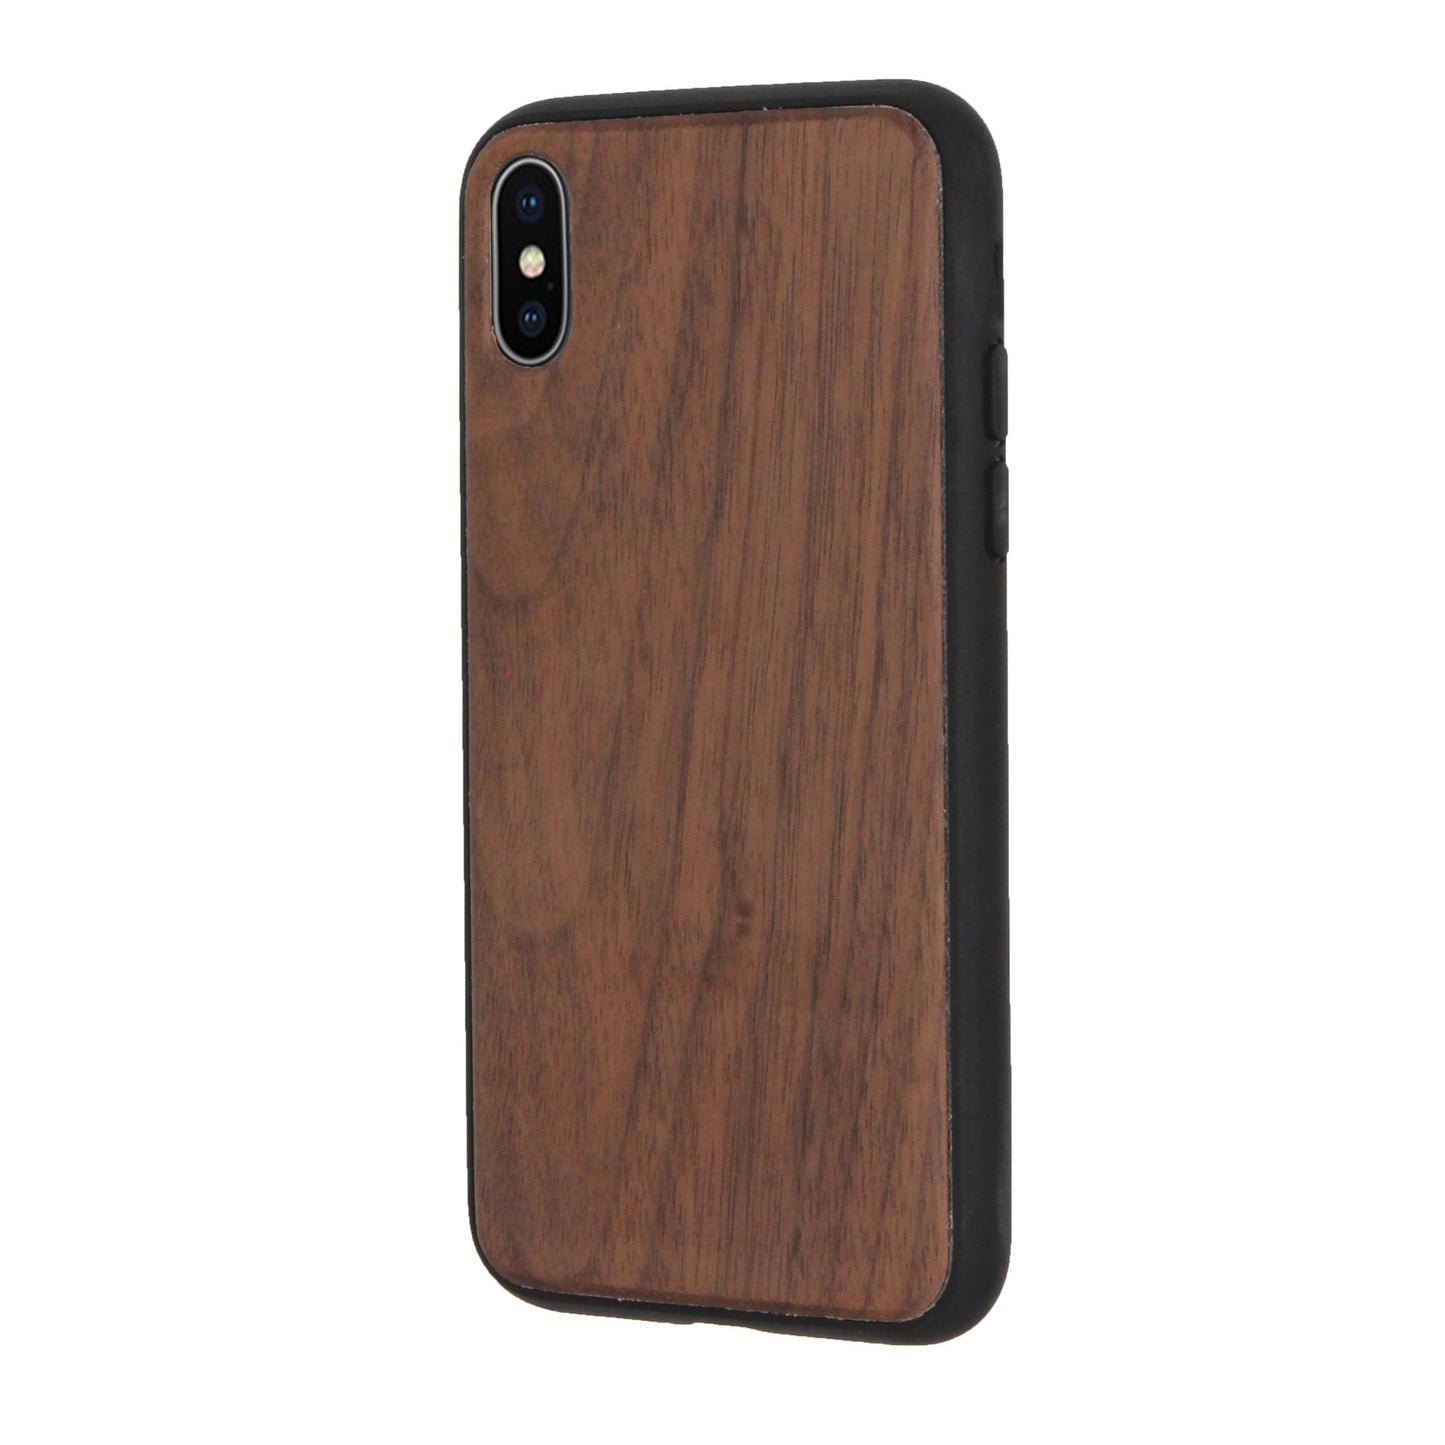 Eden case made of walnut wood for iPhone X/XS